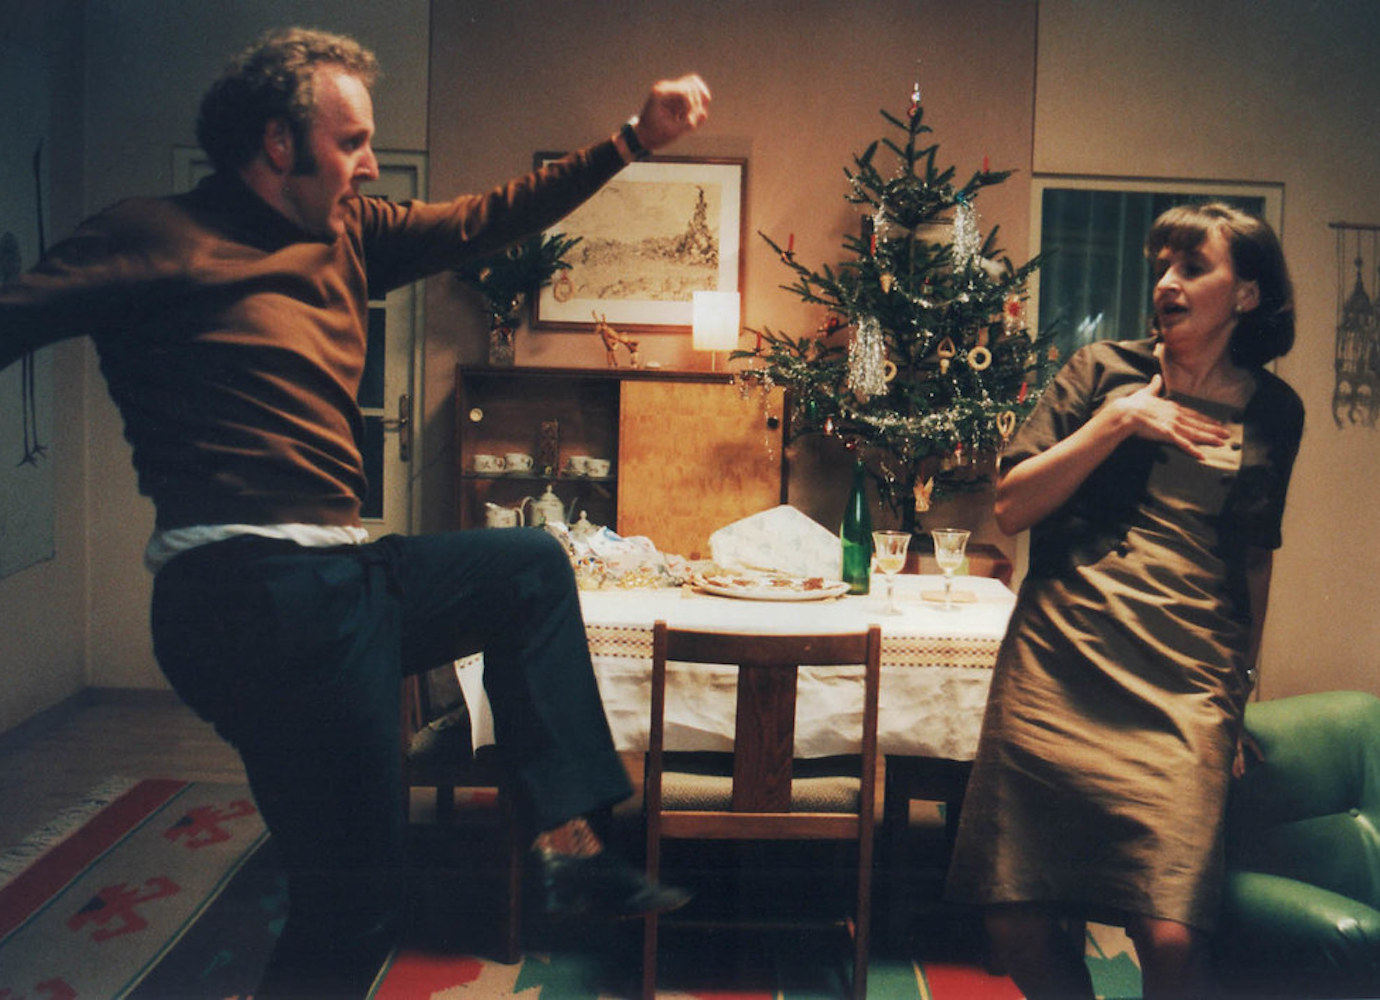 Hilarious and heartfelt, Cosy Dens is a warm Christmas film from Czech Republic | Film of the Week